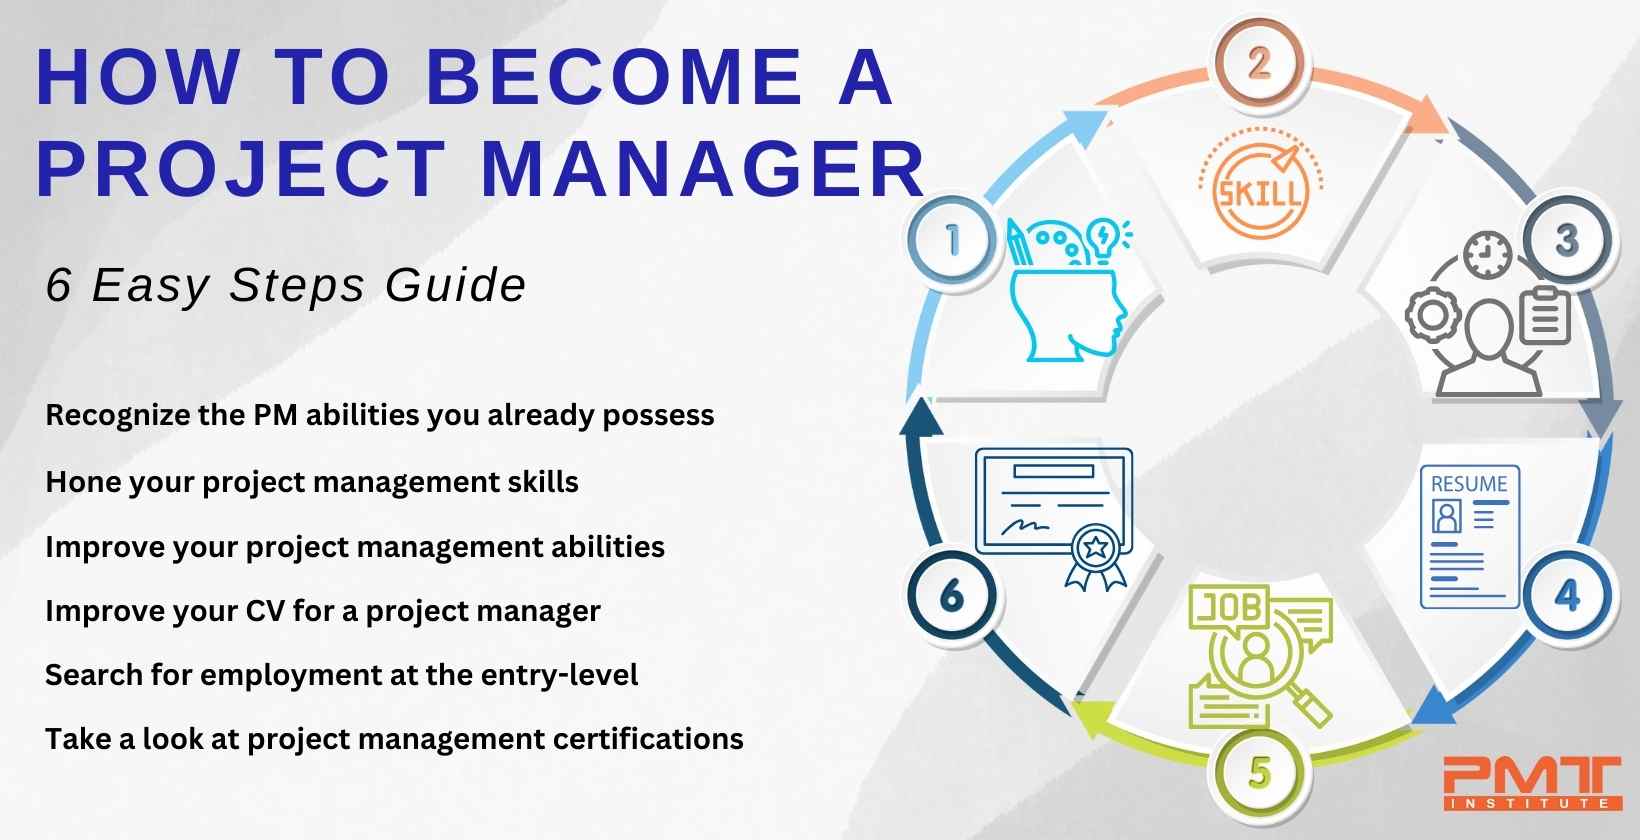 How to become a Project Manager? 6 Easy Steps Guide